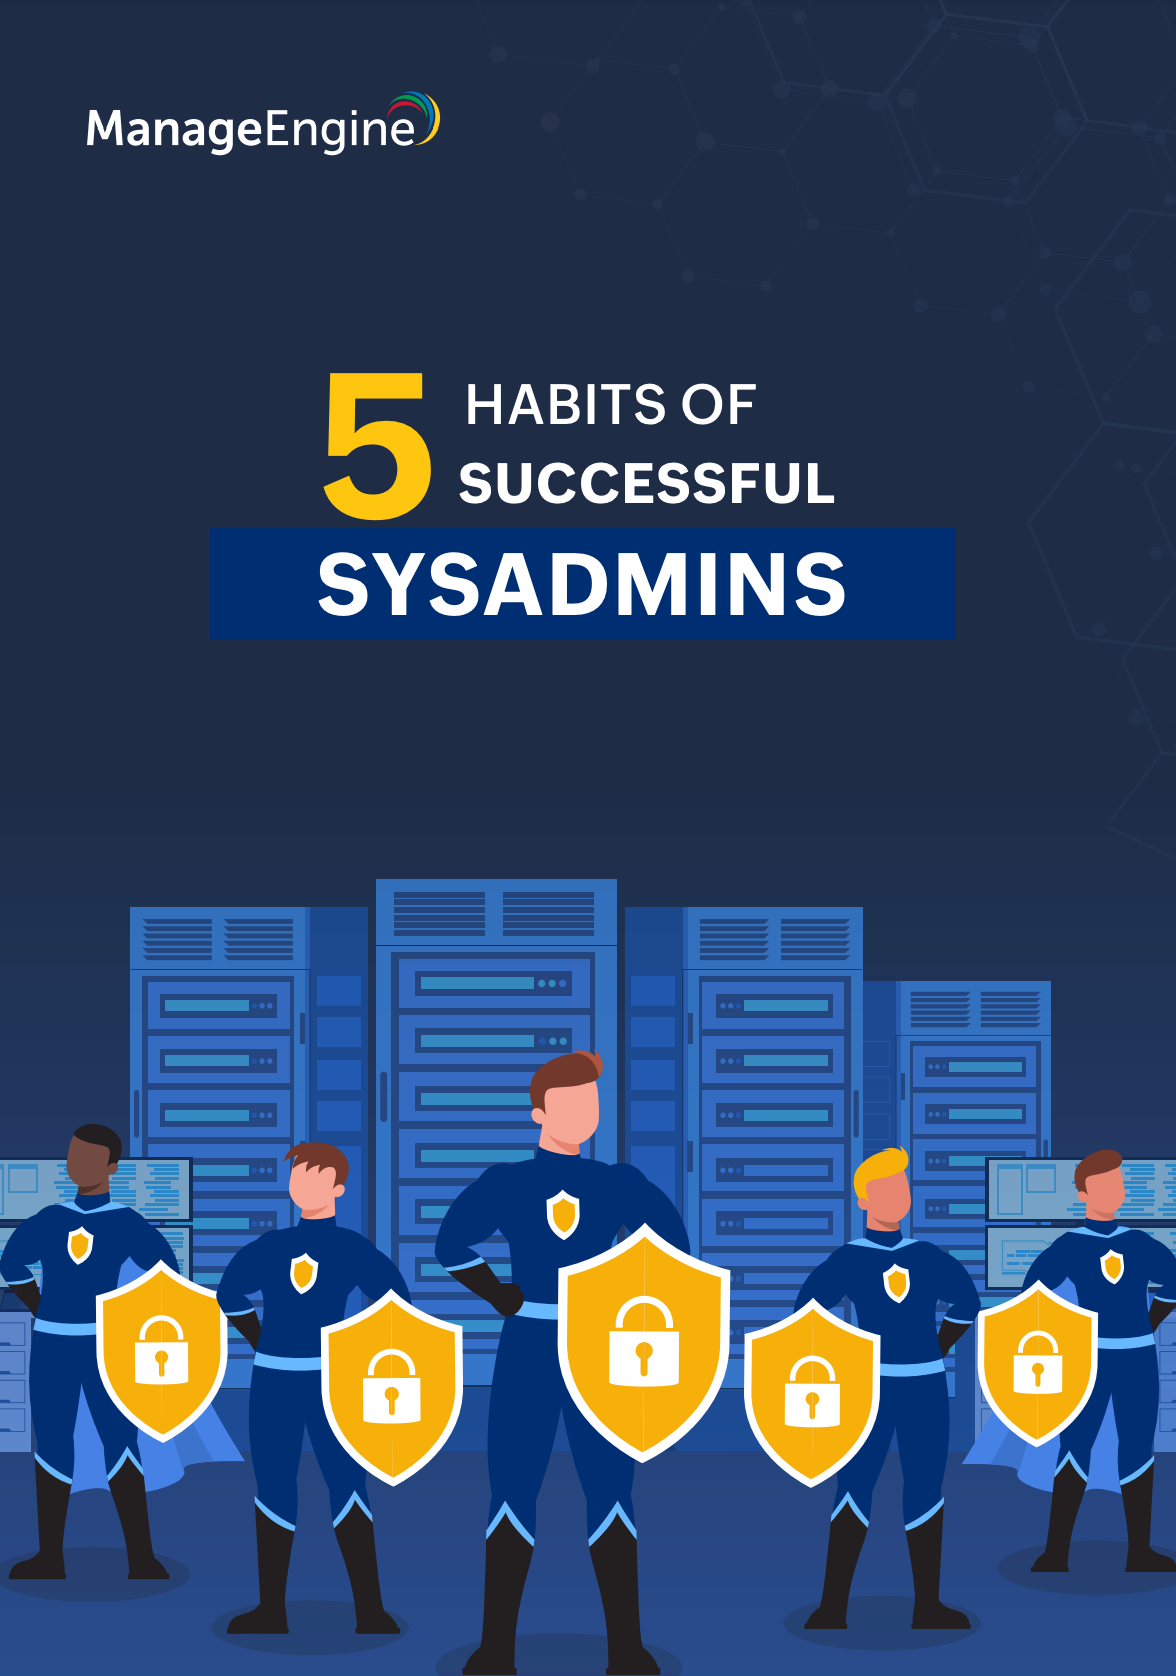 Five Habits of Successful Sysadmins.